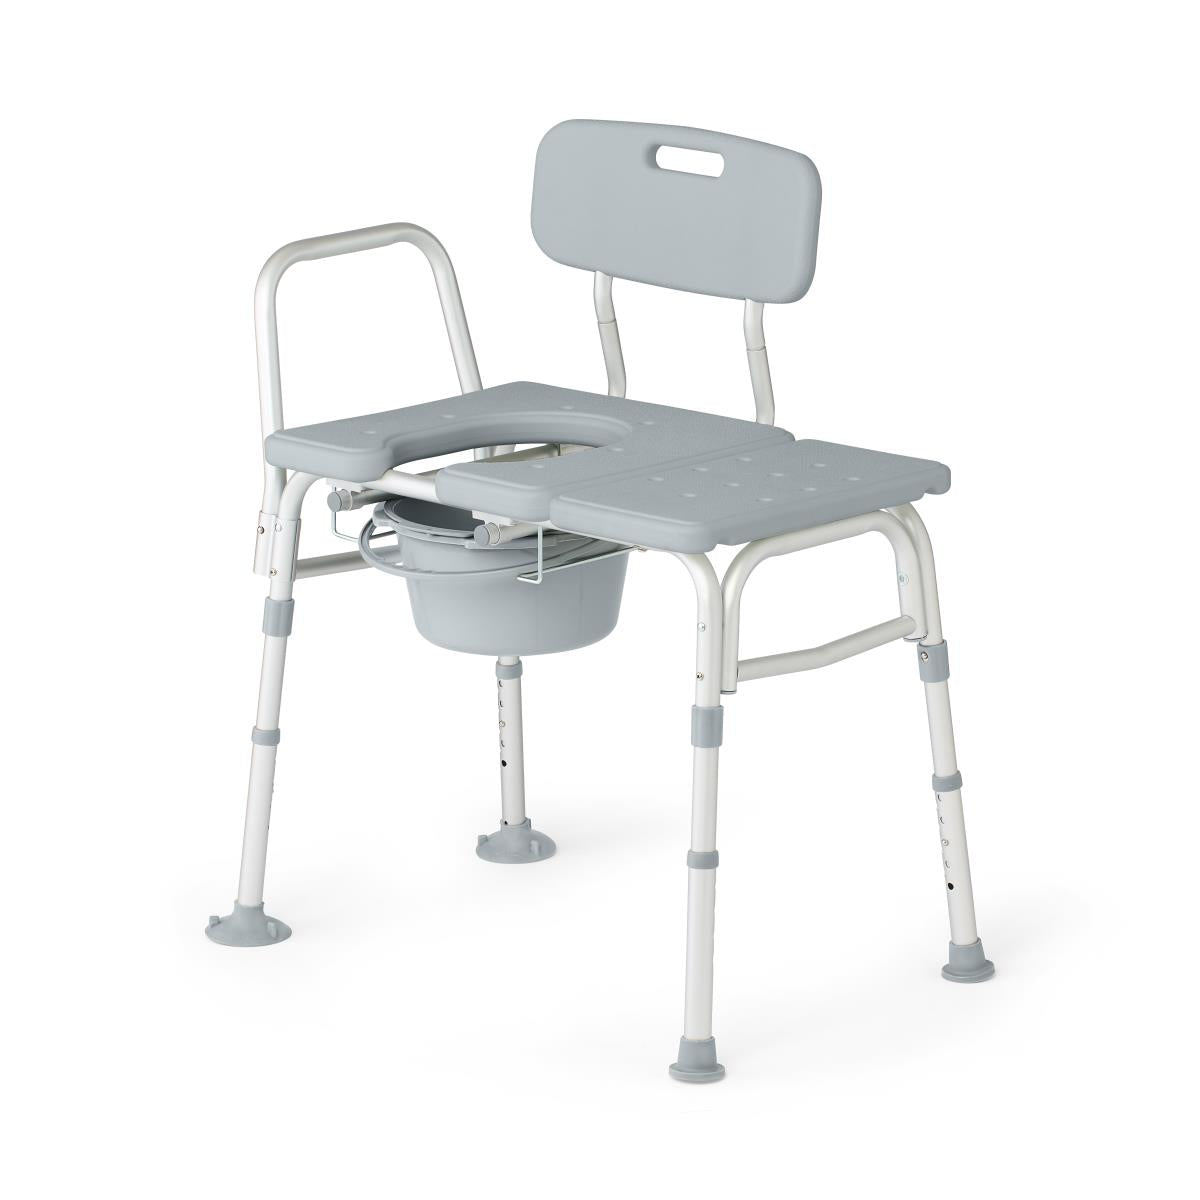 Medline Combination Transfer Bench and Commode 400lb